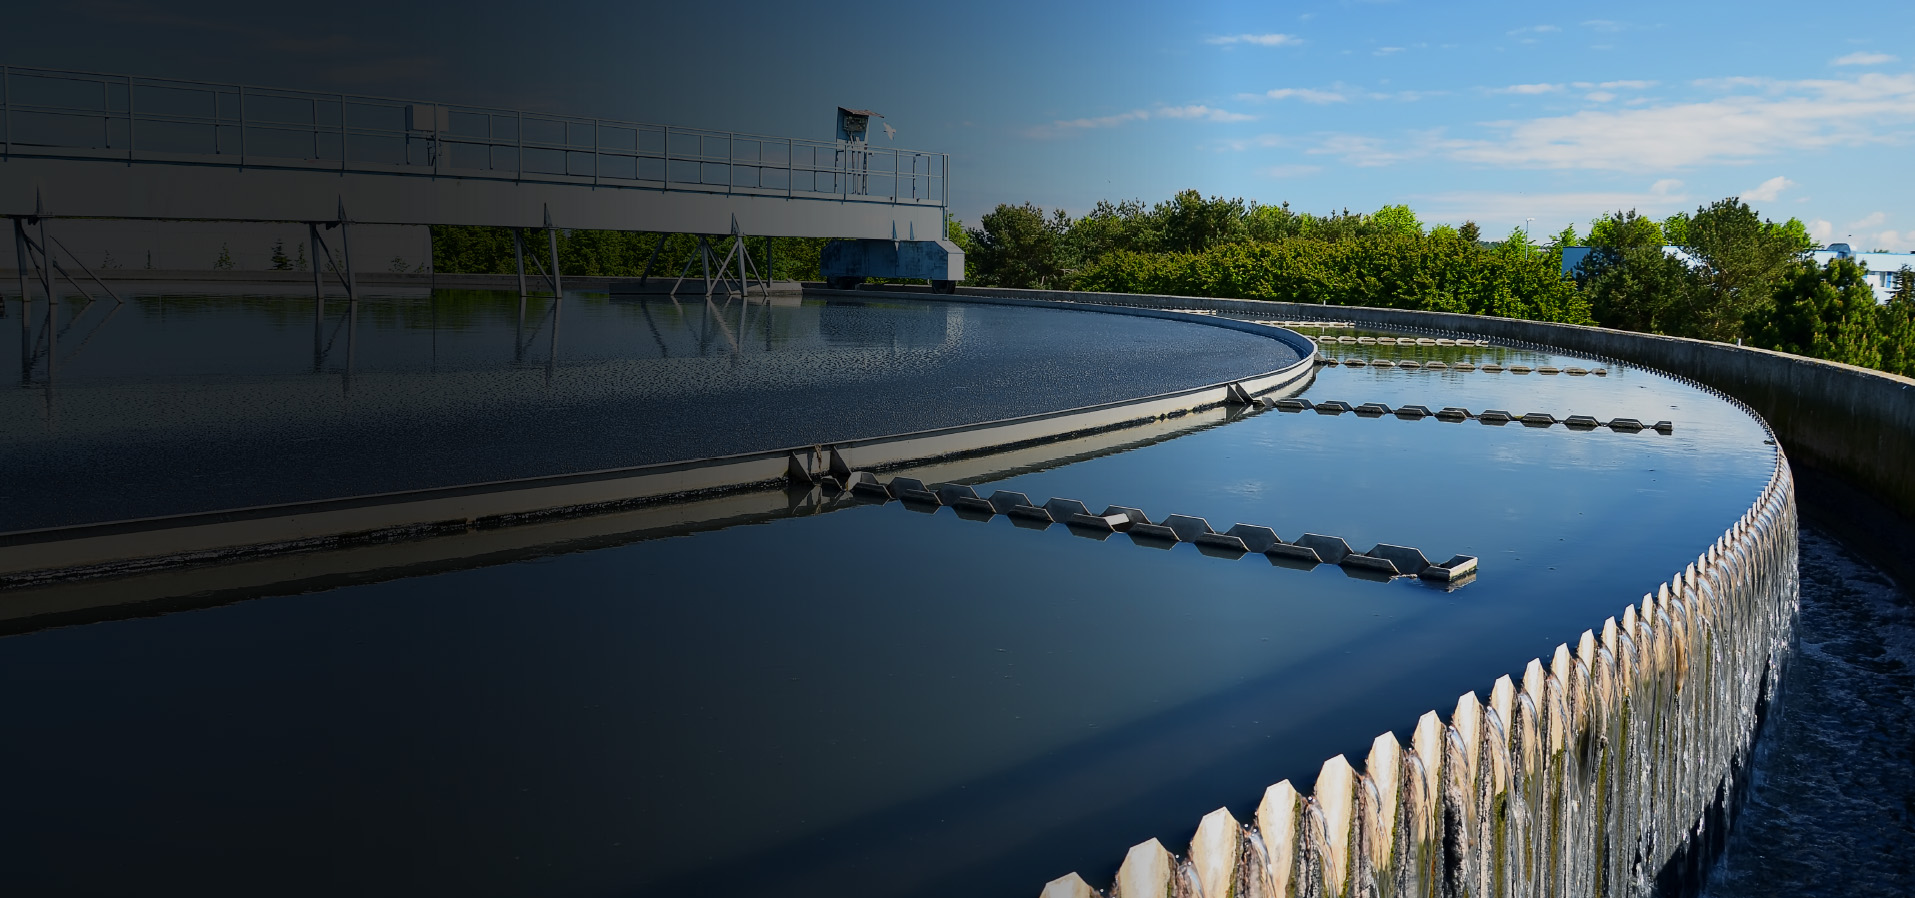   CUSTOM SOLUTIONS FOR WASTE WATER TREATMENT   Our services include Wastewater Systems Operations, Maintenance and Testing; Drinking Water Systems Operations, Maintenance and Testing; and Industrial Monitoring and Stormwater Management.   SERVICES  